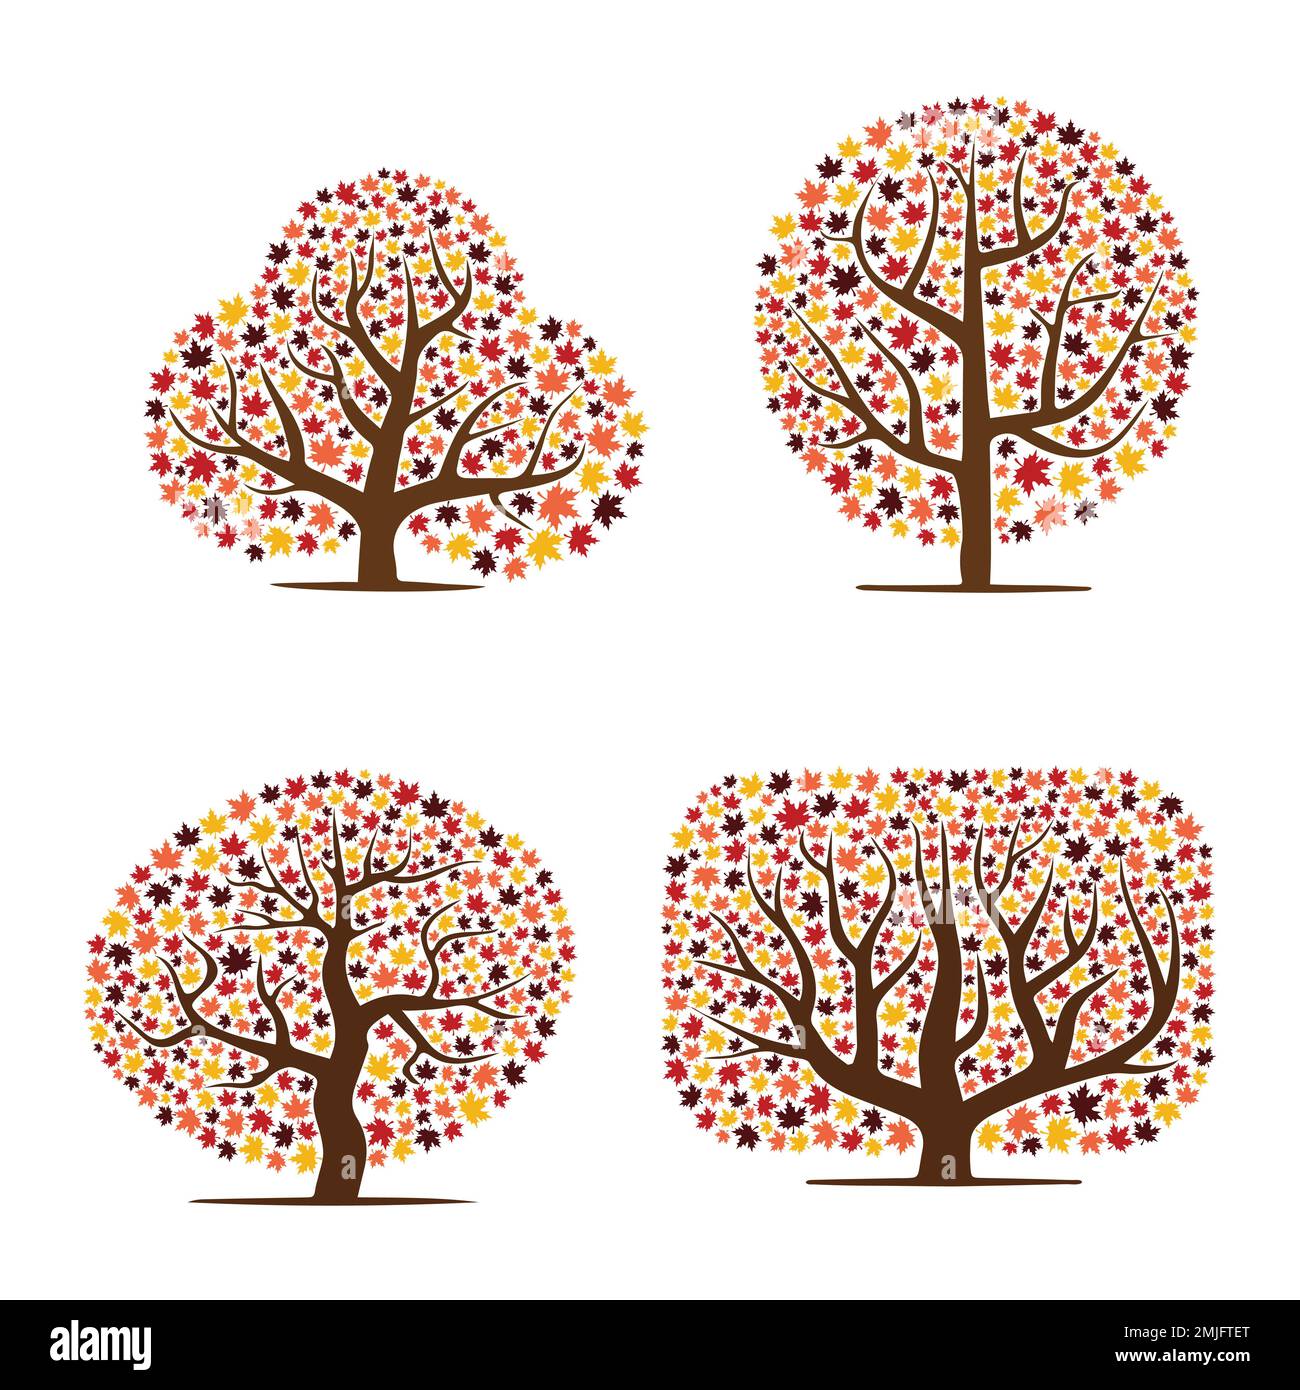 Abstract maple leaves tree silhouettes set Stock Vector